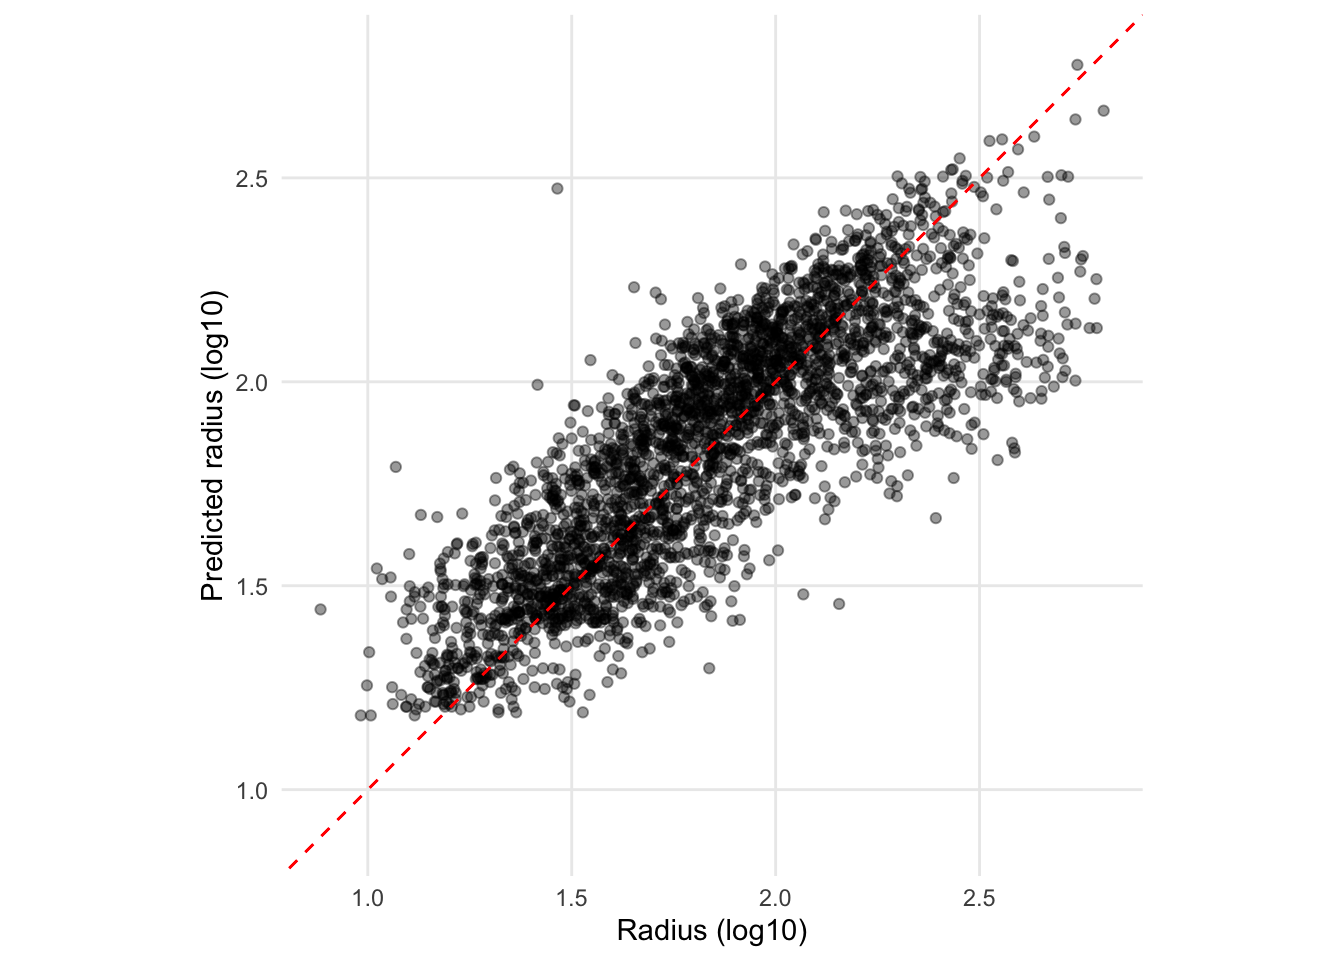 Figure 5. Linear model predictions versus actual observations of radii distance (log scale).